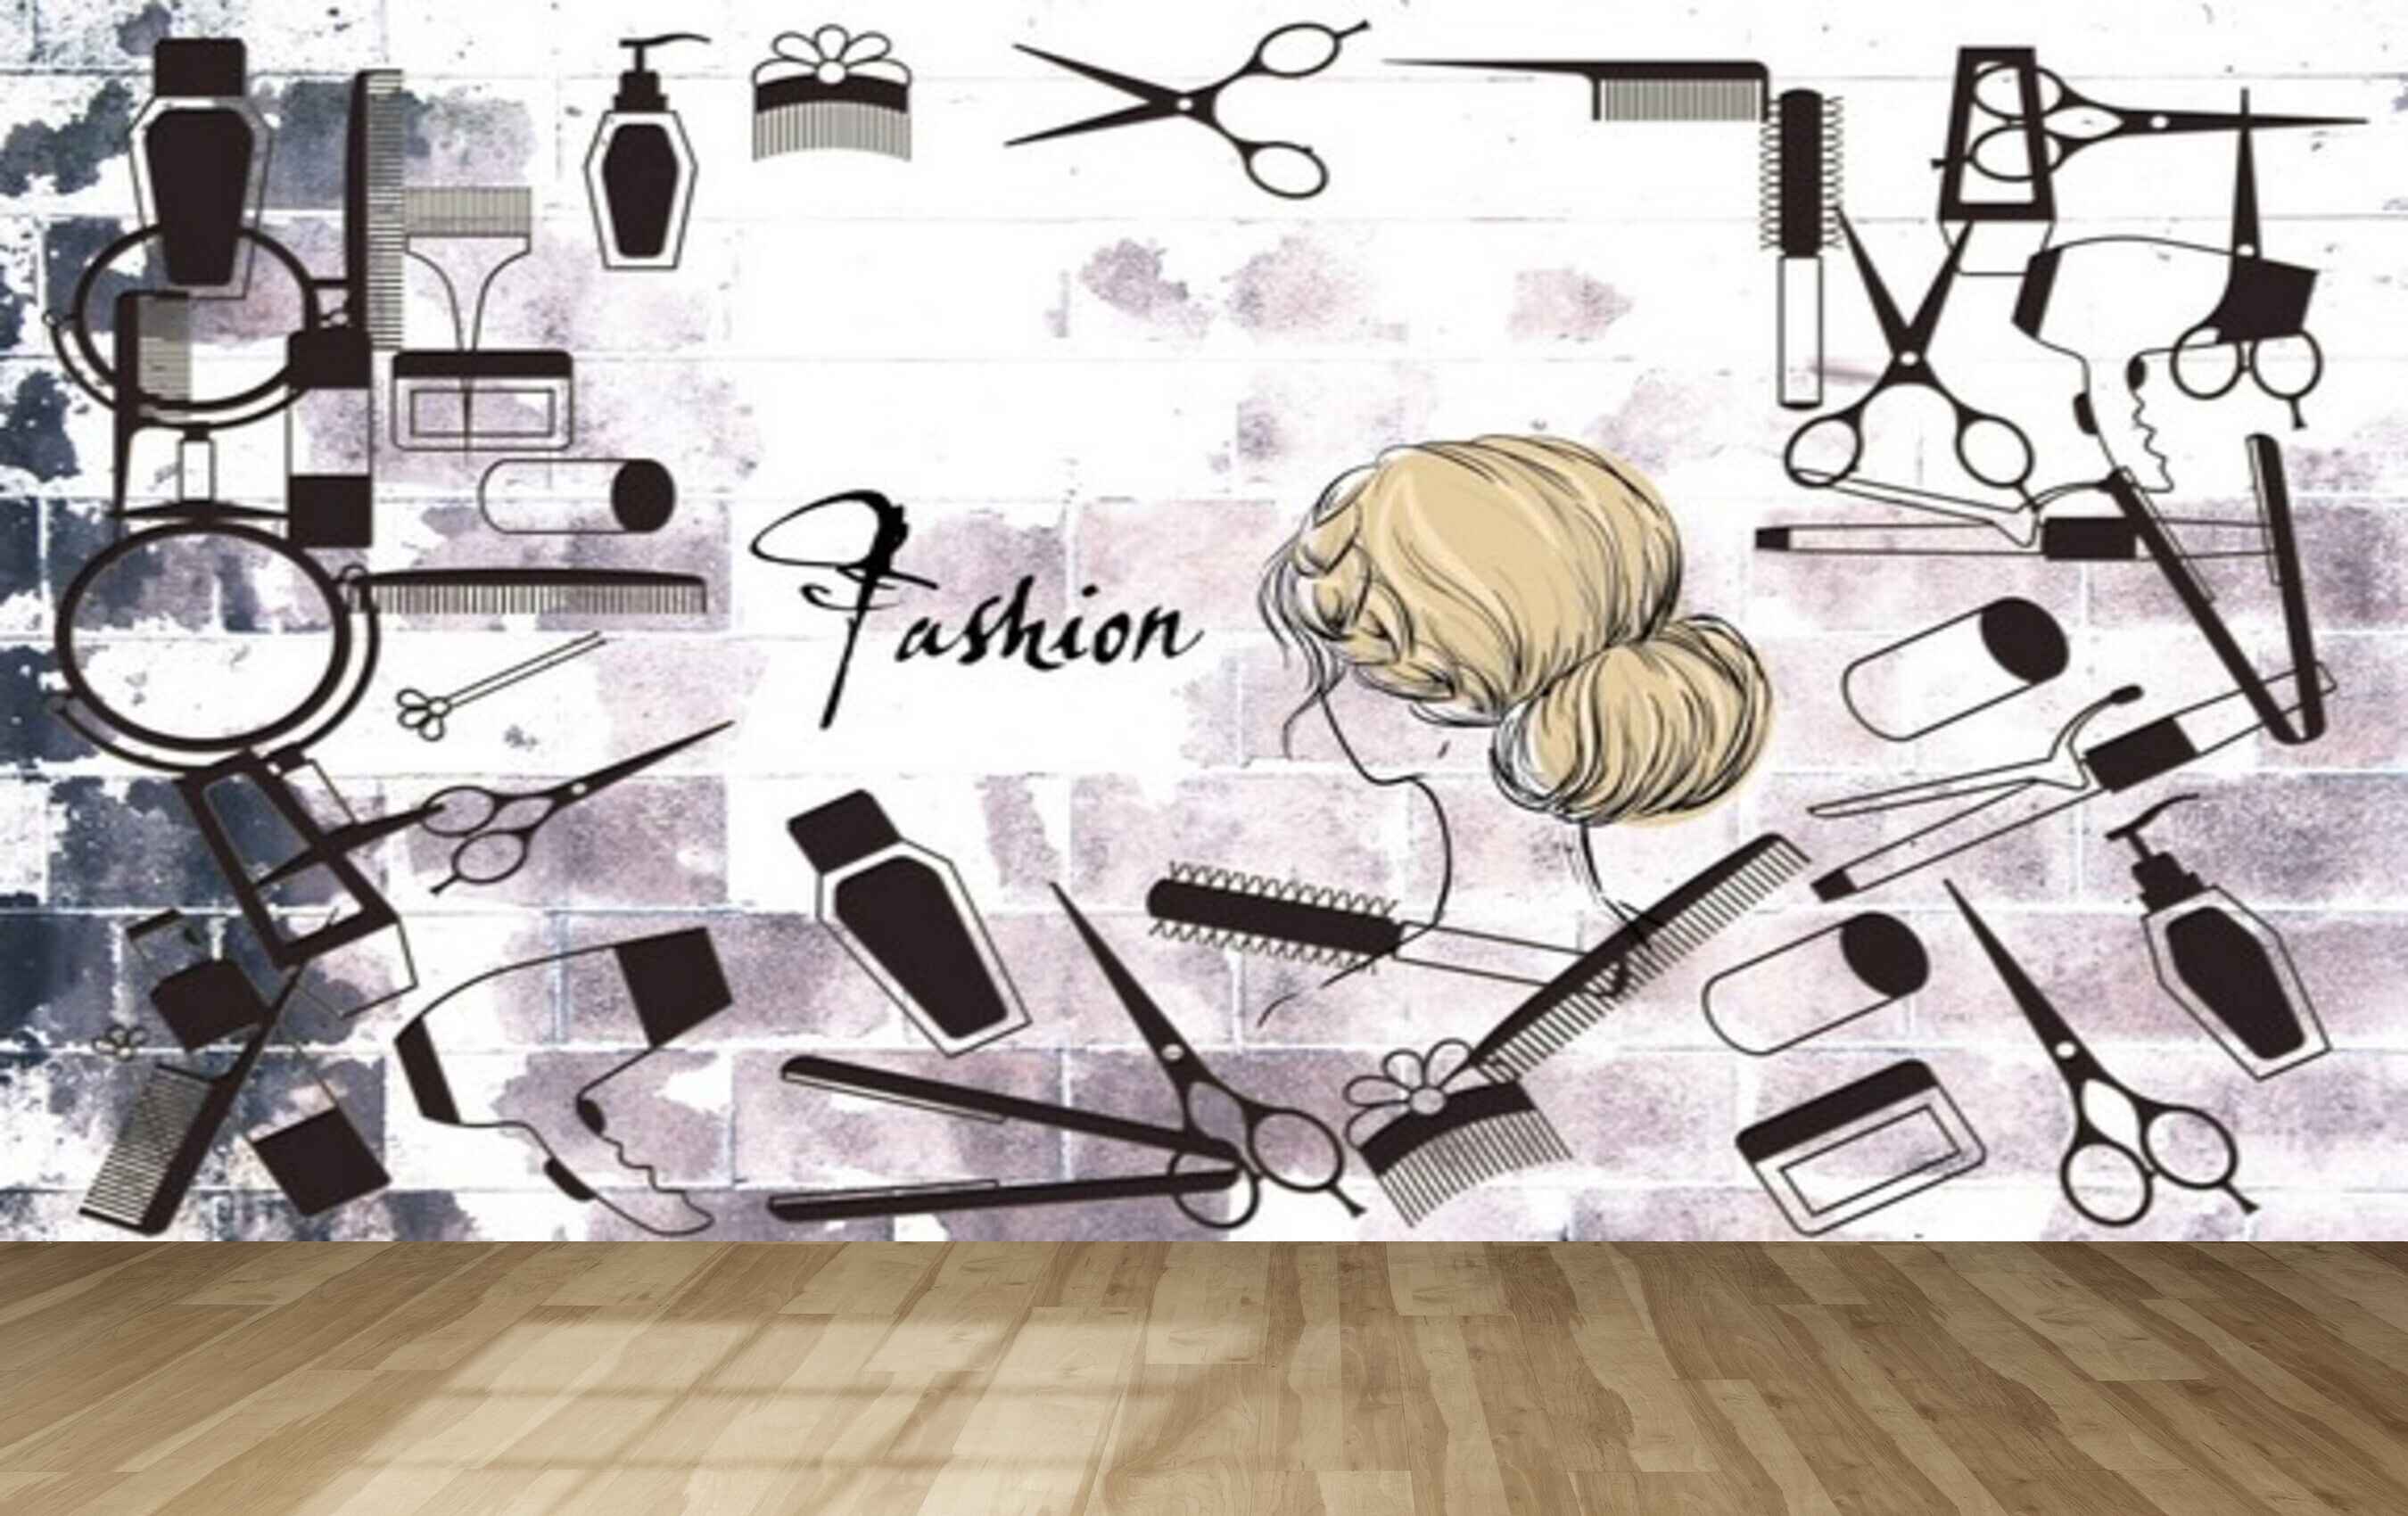 Avikalp MWZ3565 Fashion Girls Hair Styles Scissors Products HD Wallpaper for Fashion Boutique